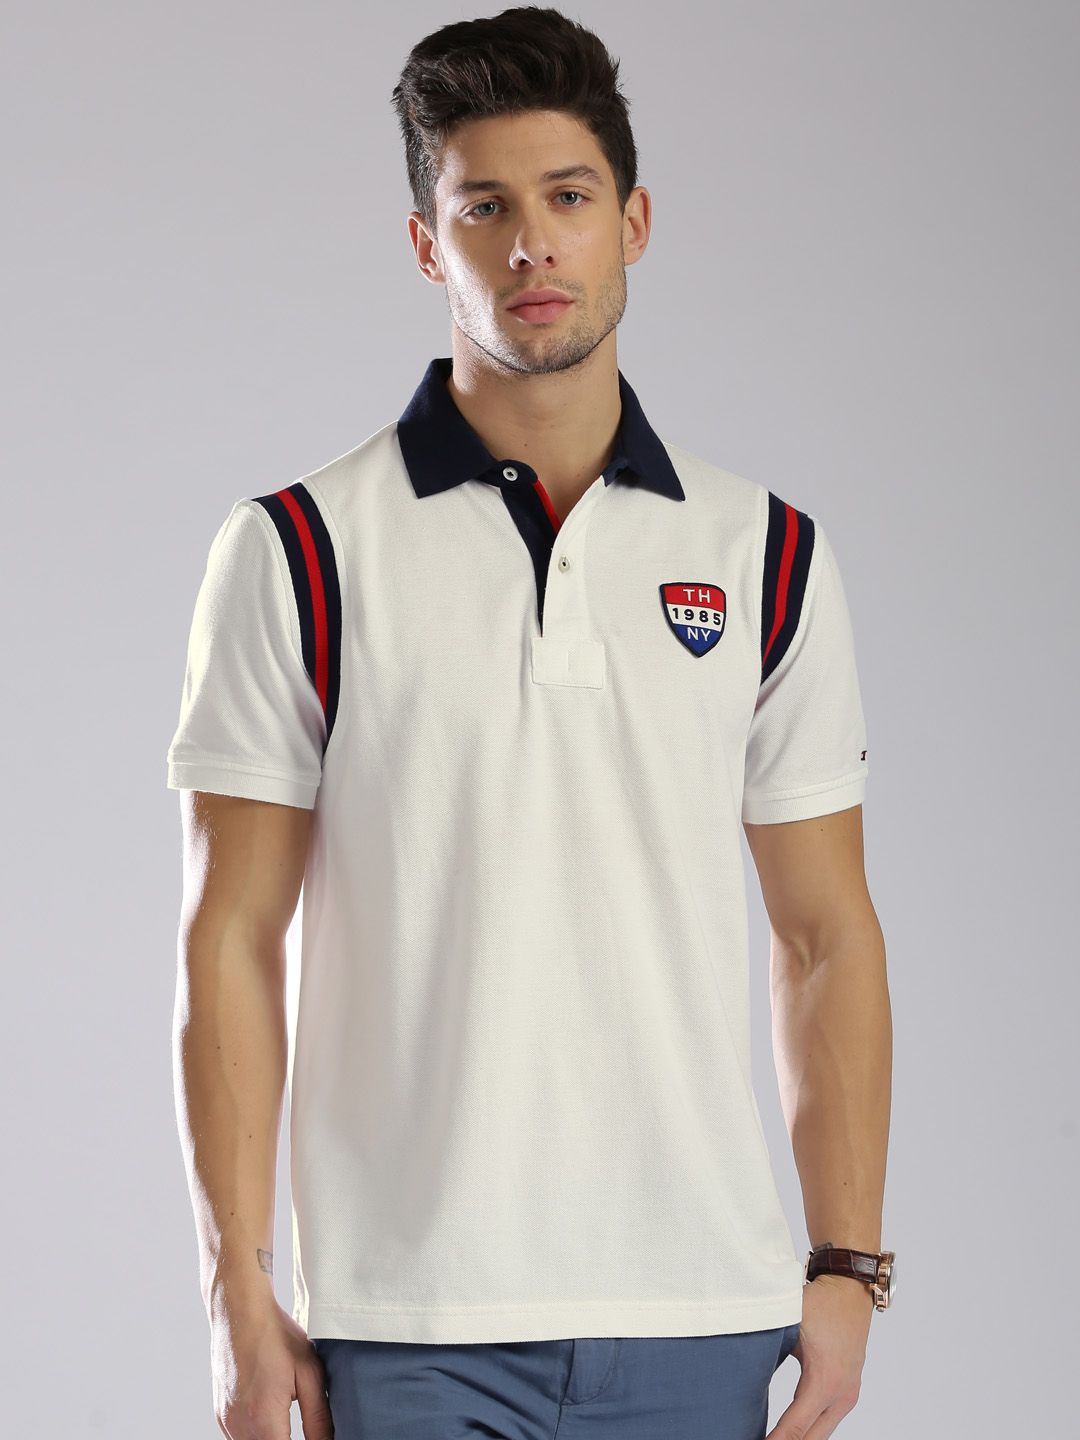 Tommy Hilfiger Polo T Shirts Price In 